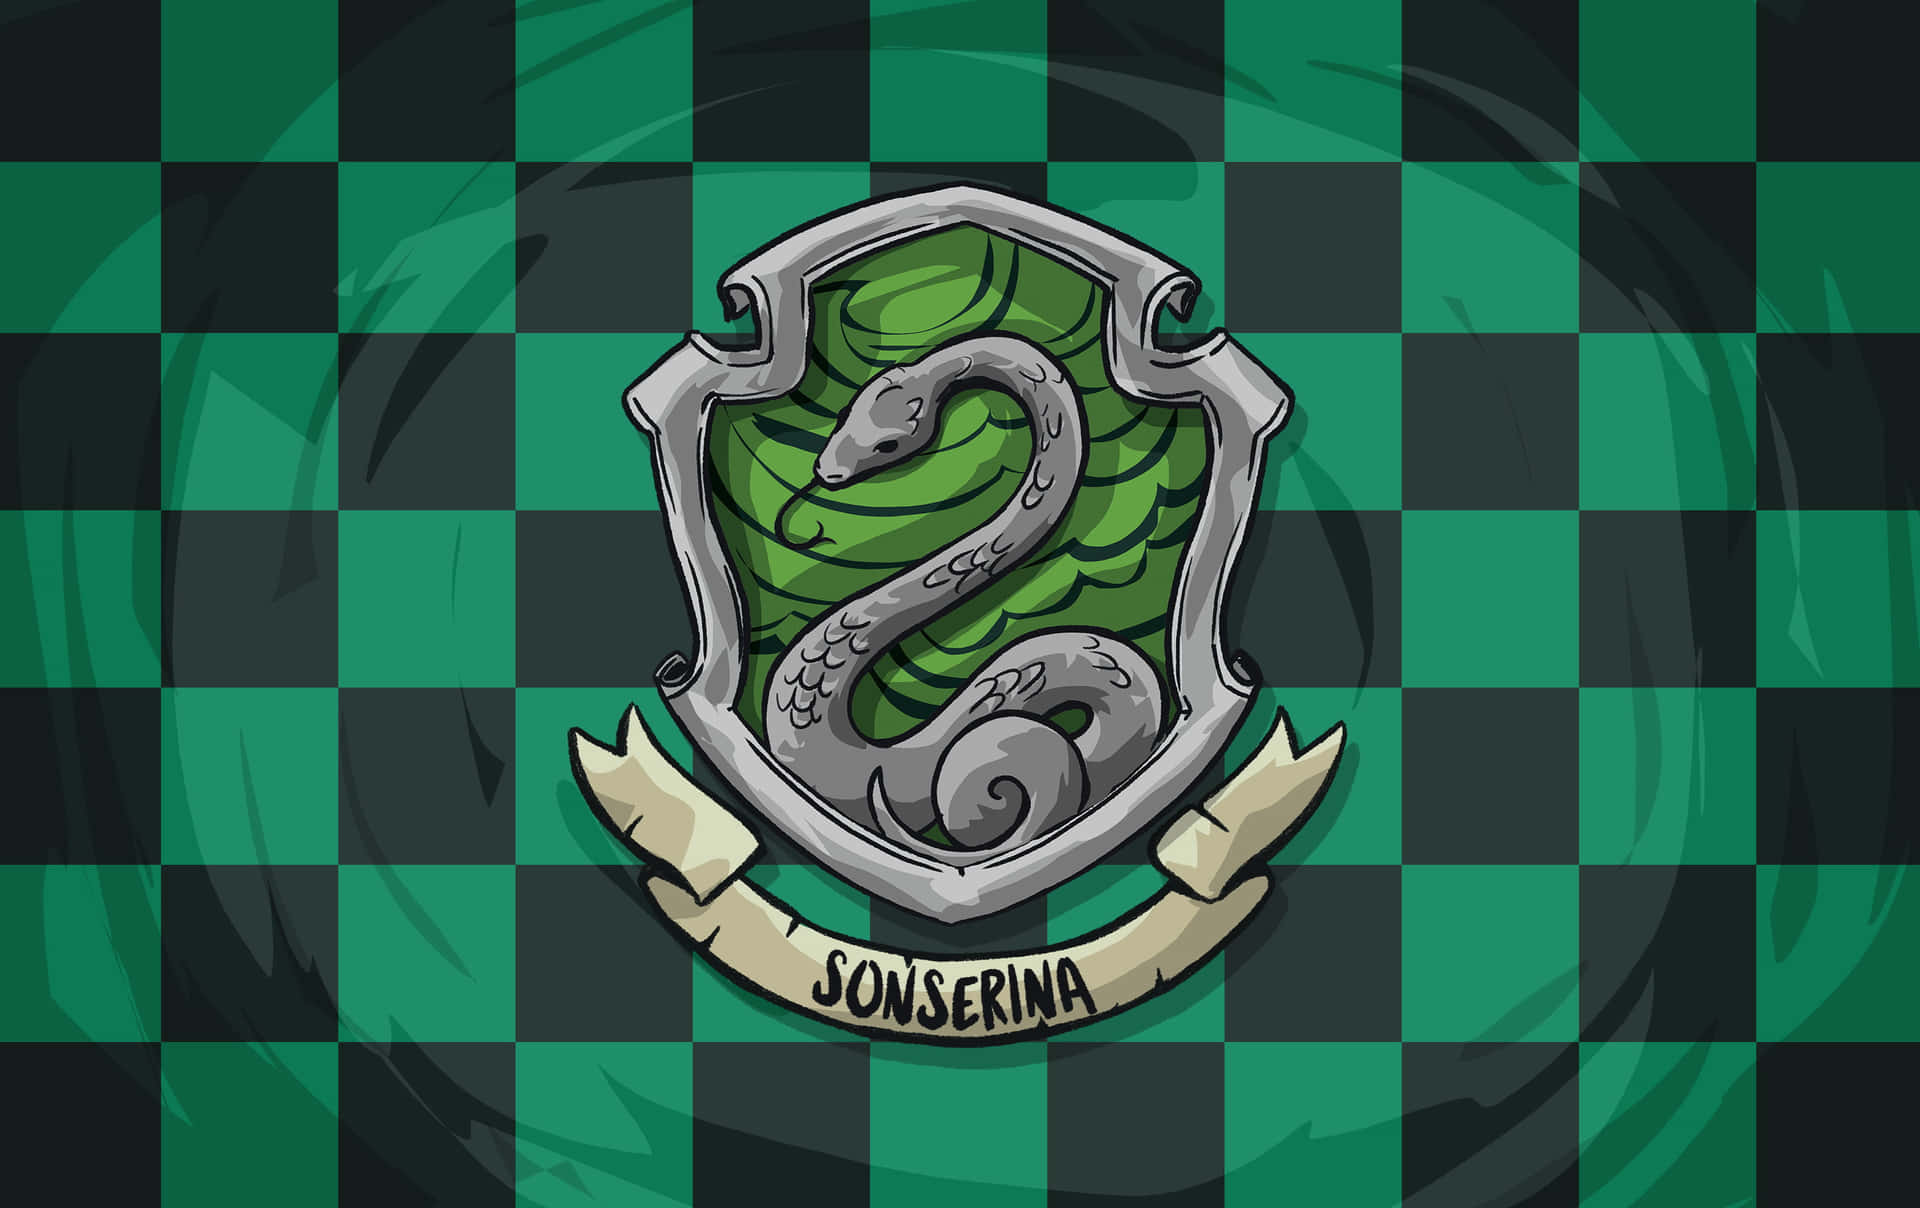 Step into the world of Slytherin